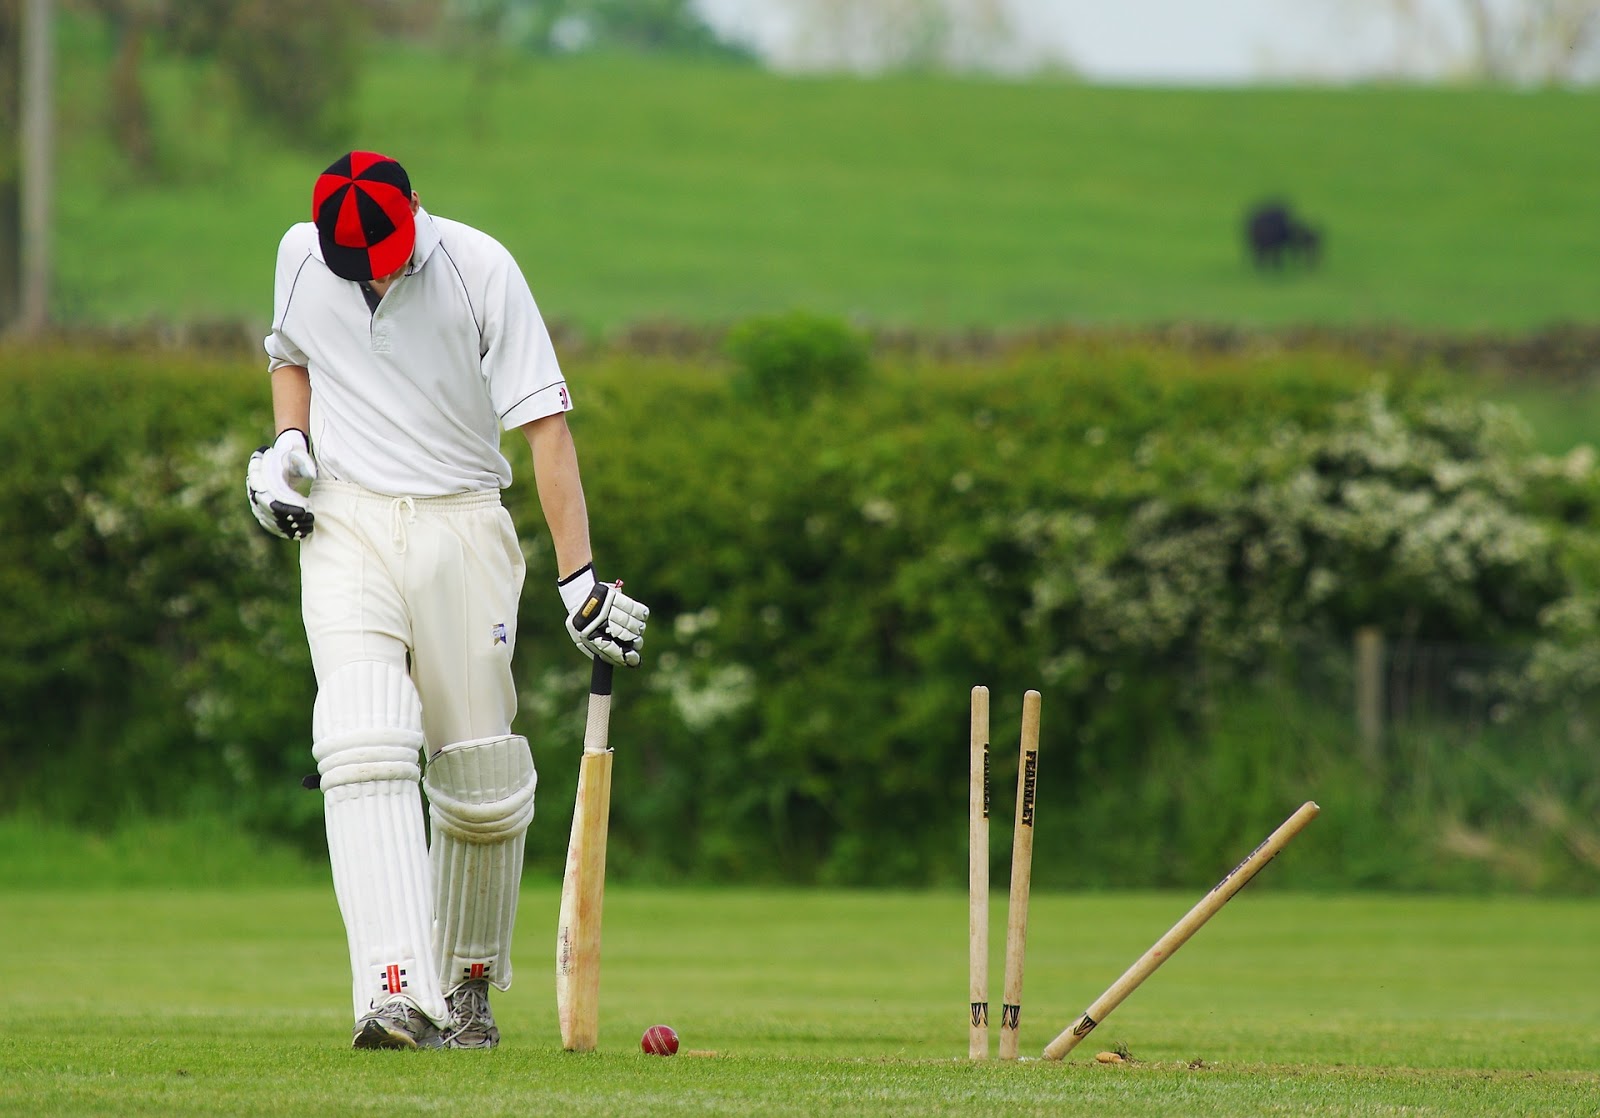 Types of Cricket Matches